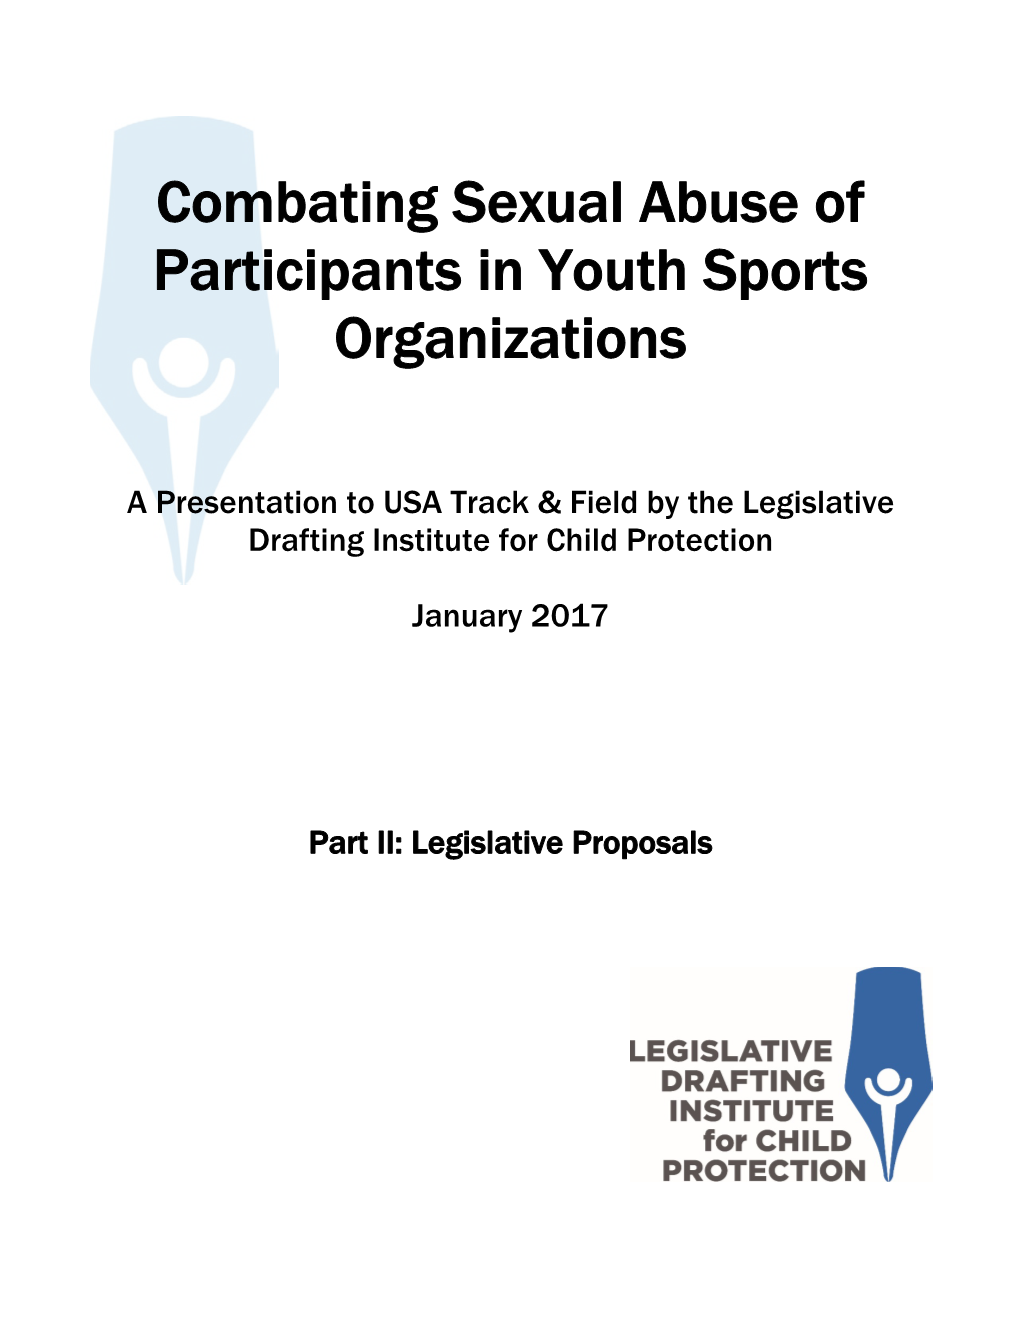 Legislative Proposals for Combating Sexual Abuse of Participants In